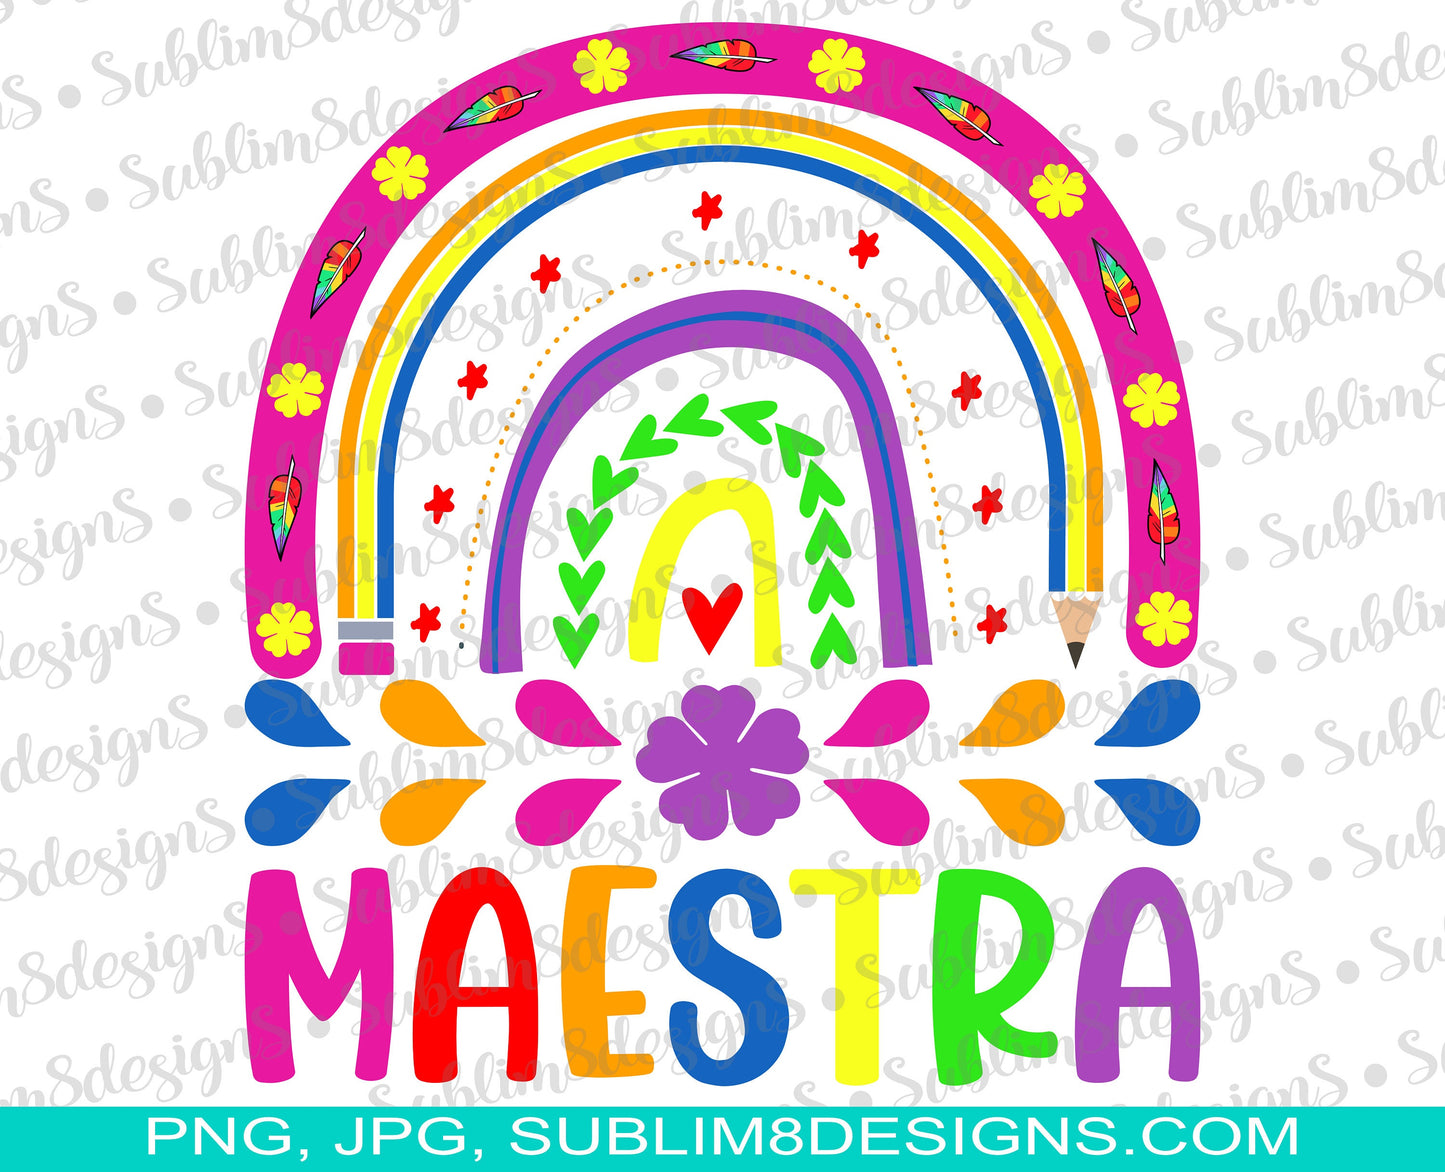 Maestra Rainbow PNG and JPG ONLY